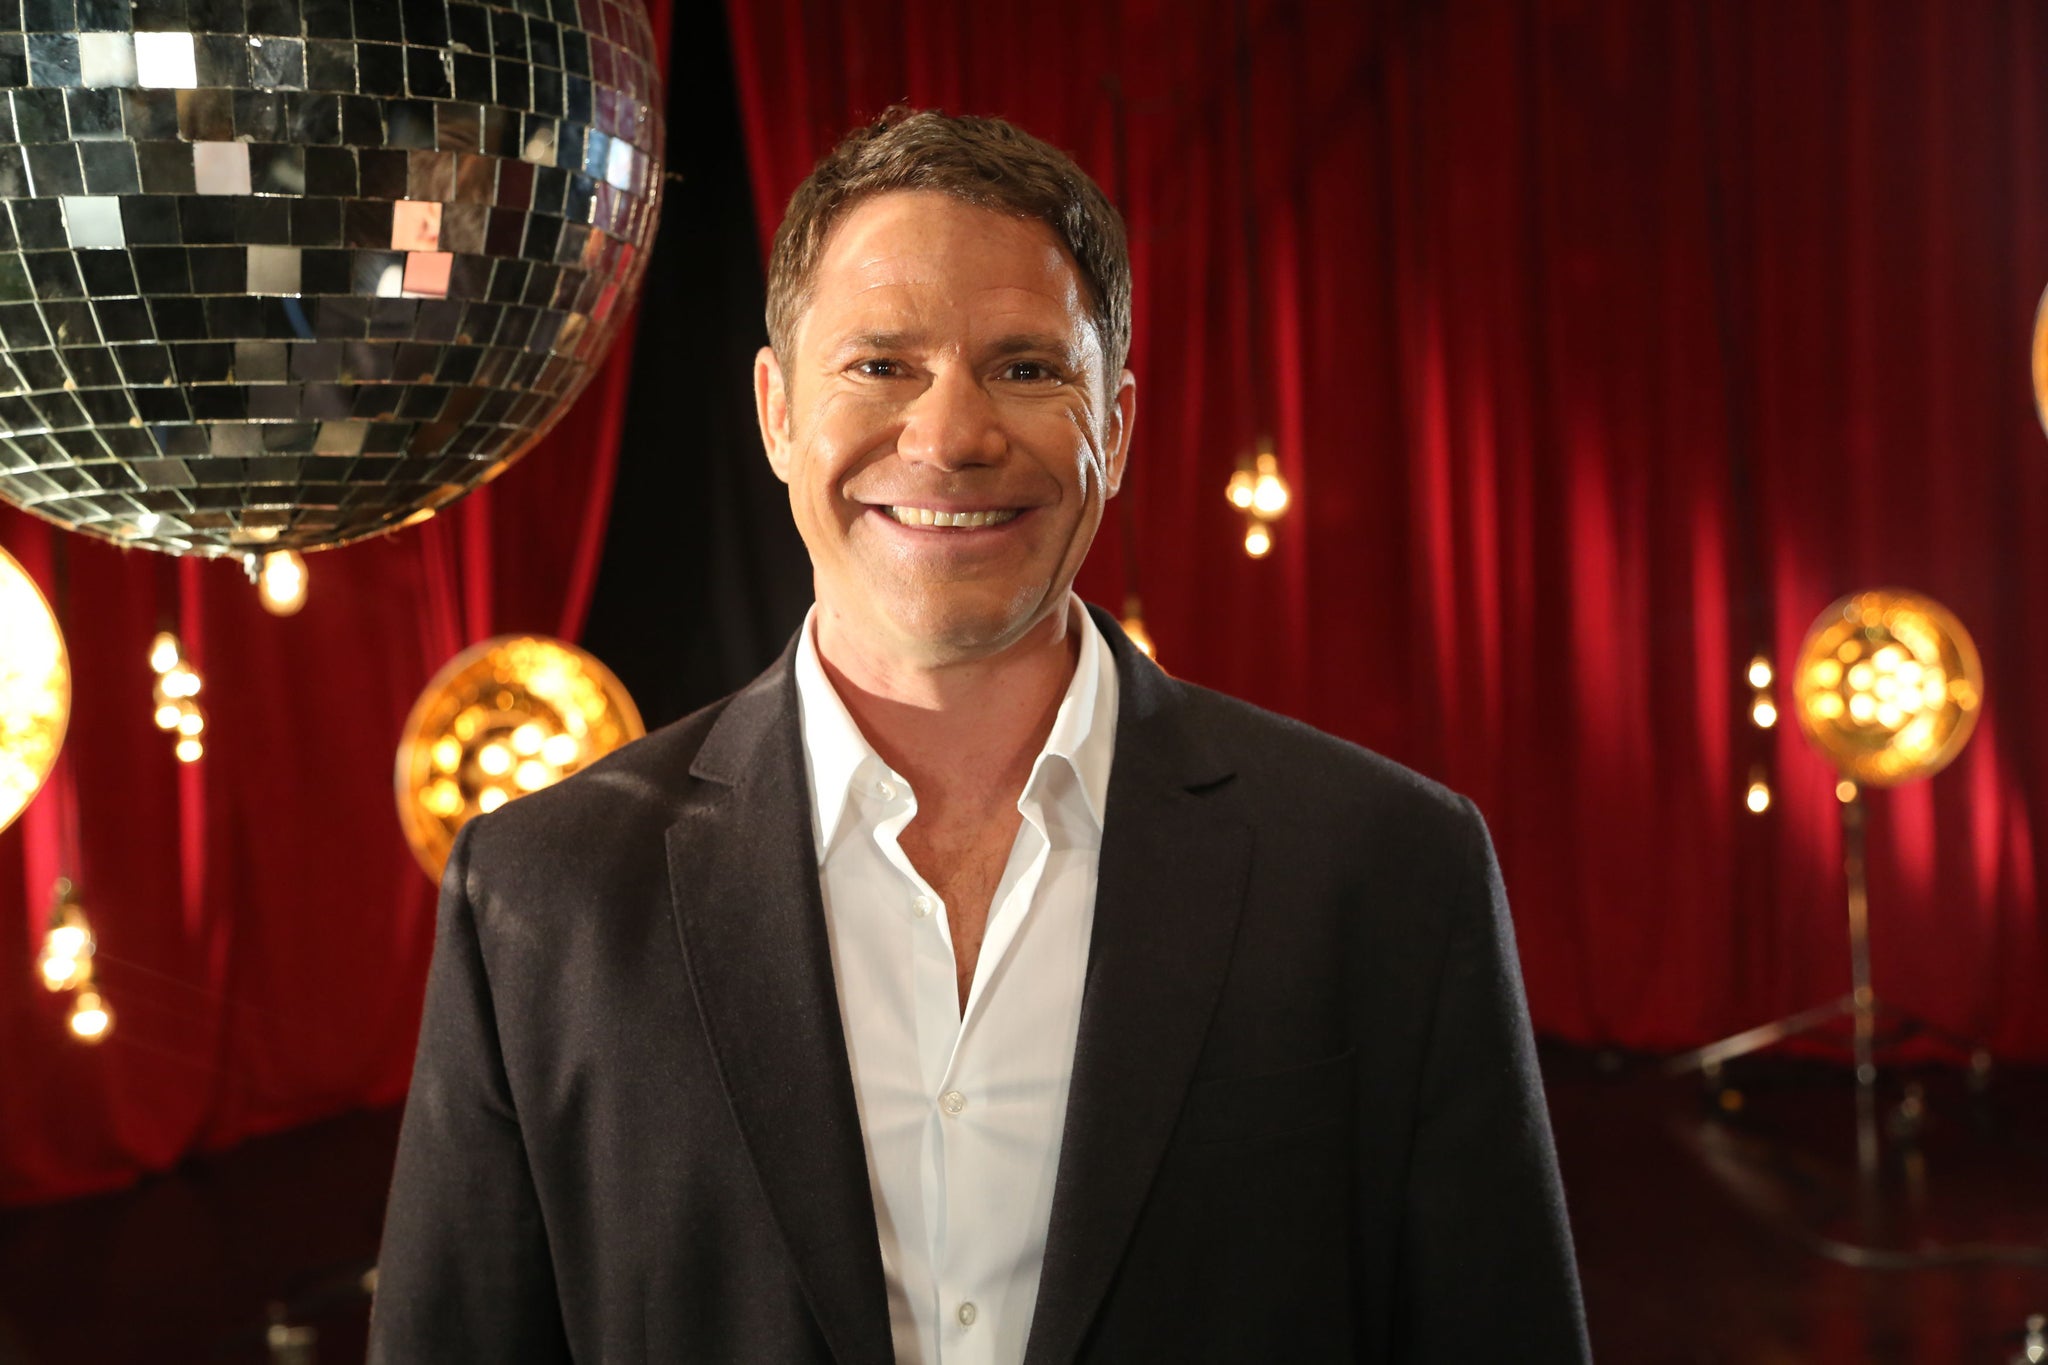 Steve Backshall has signed up to appear in Strictly Come Dancing 2014